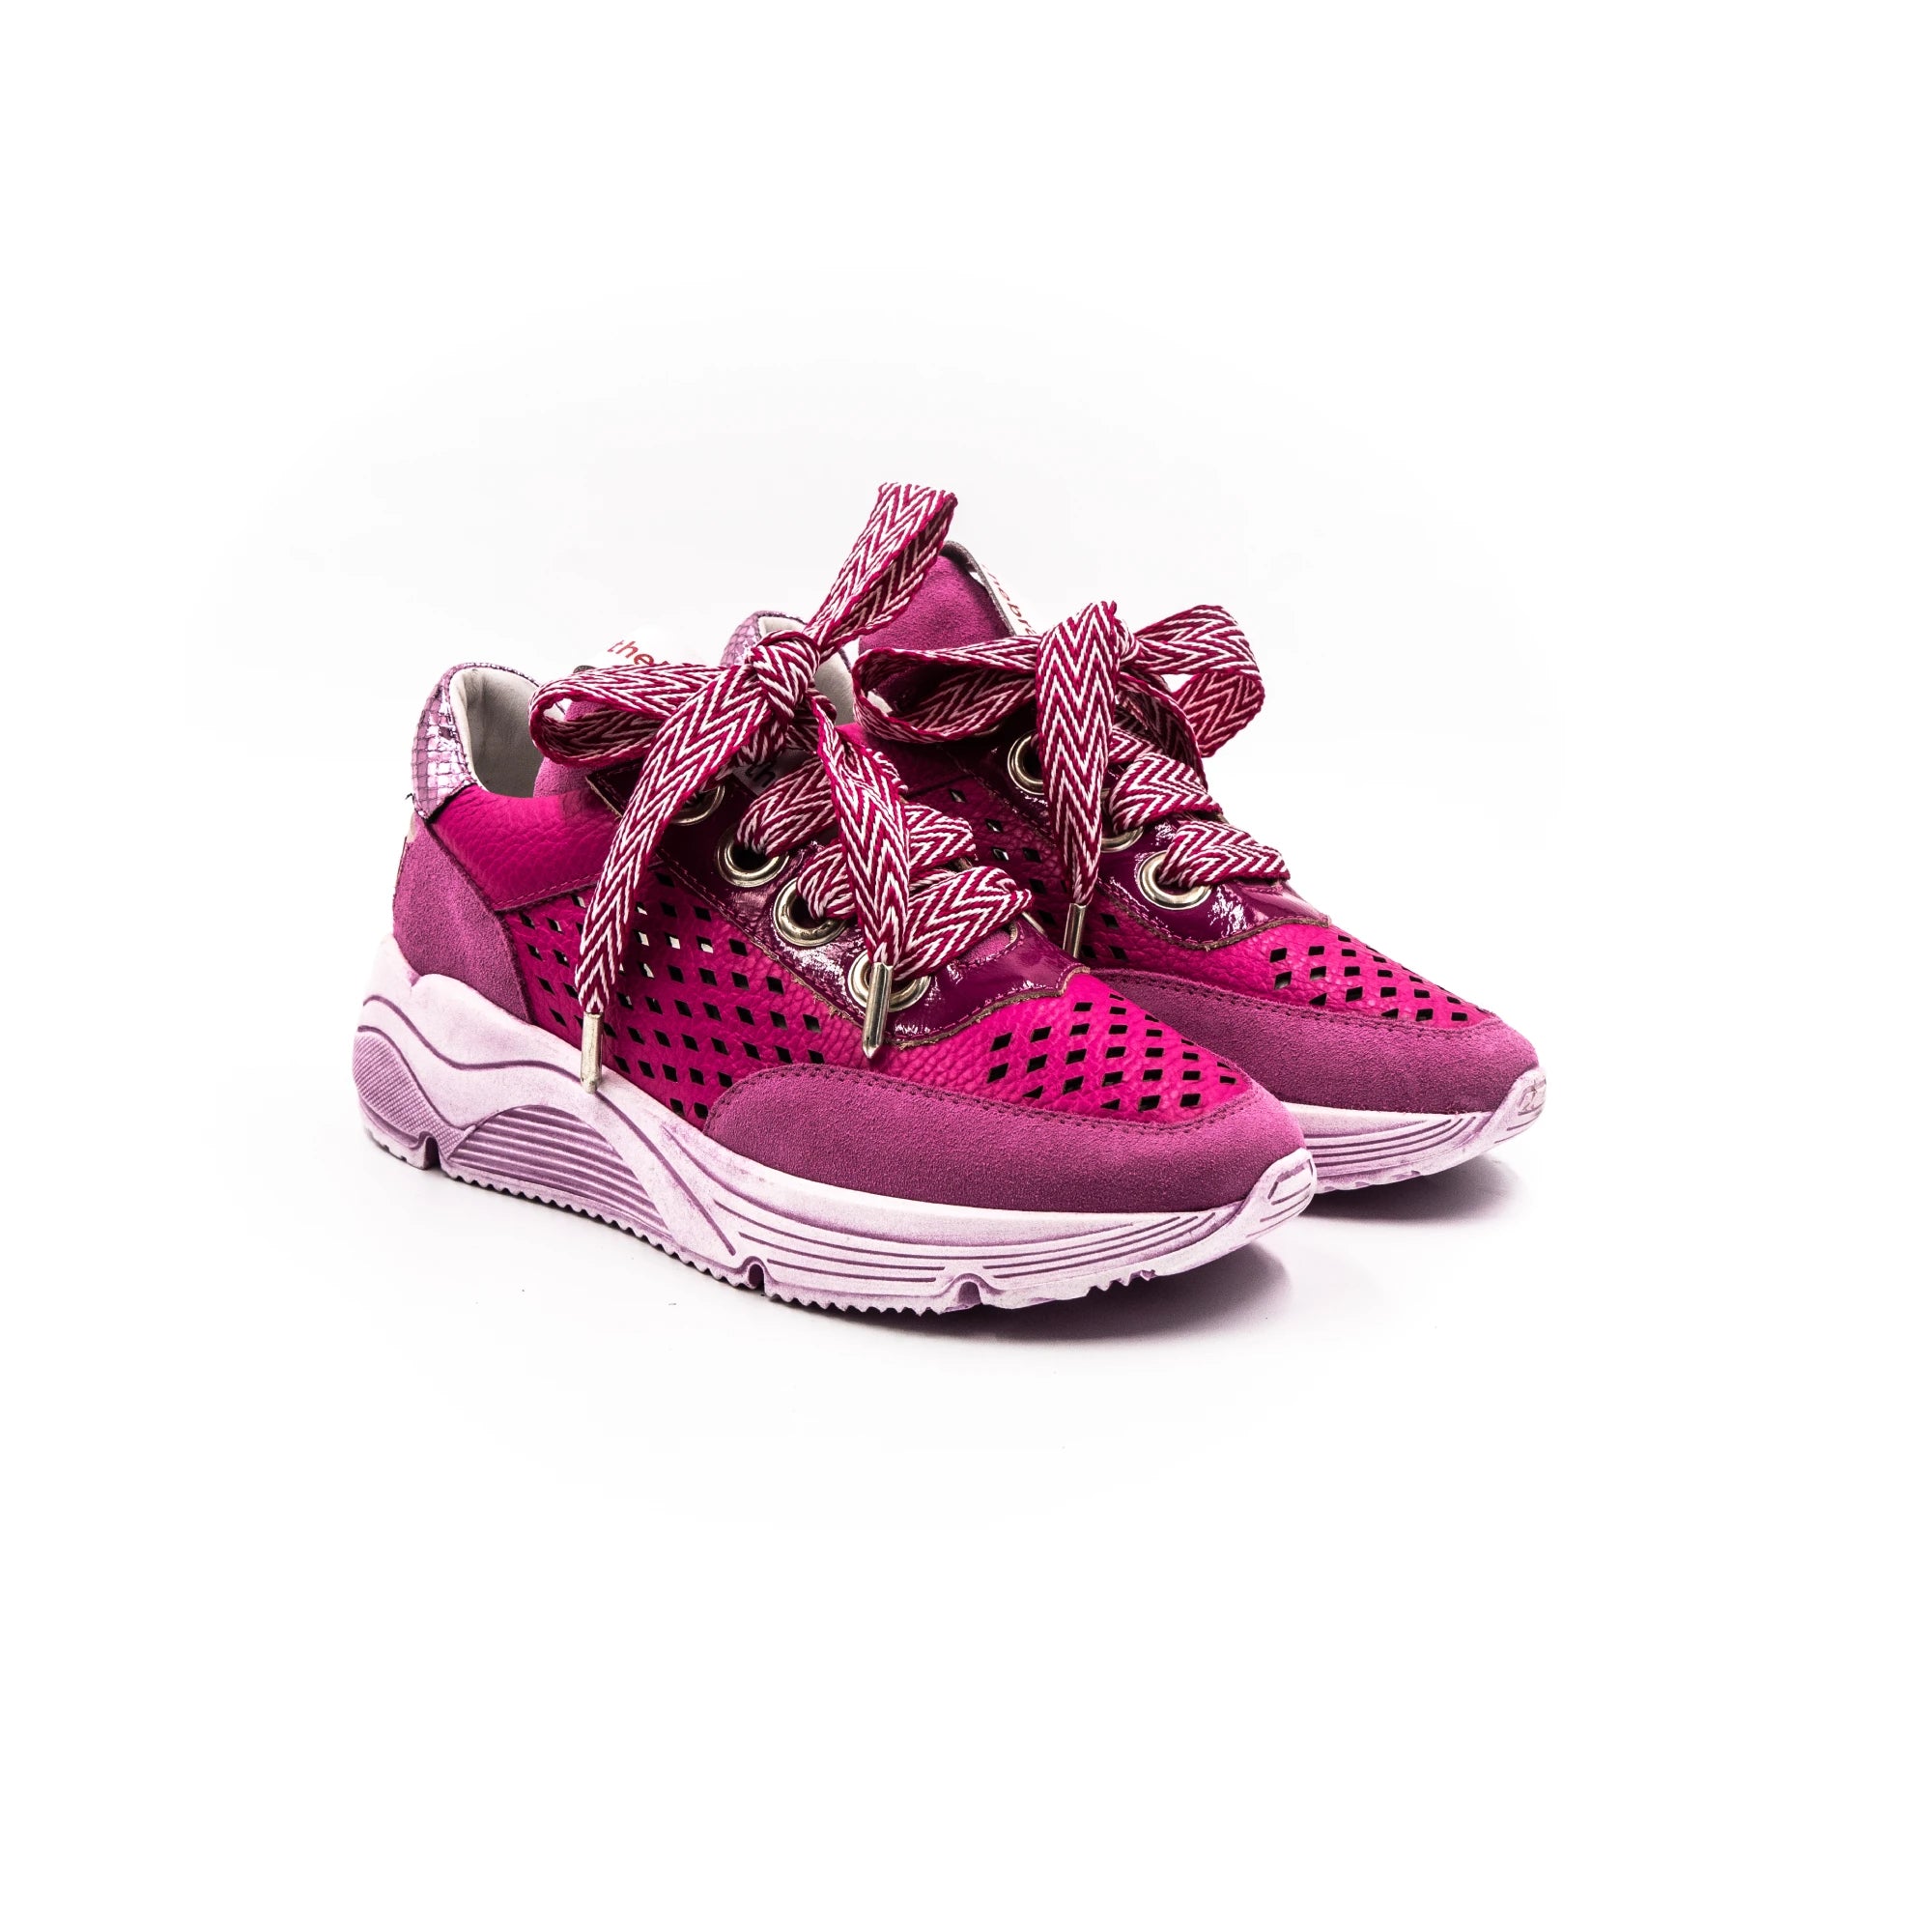 Pink perforated sneakers.